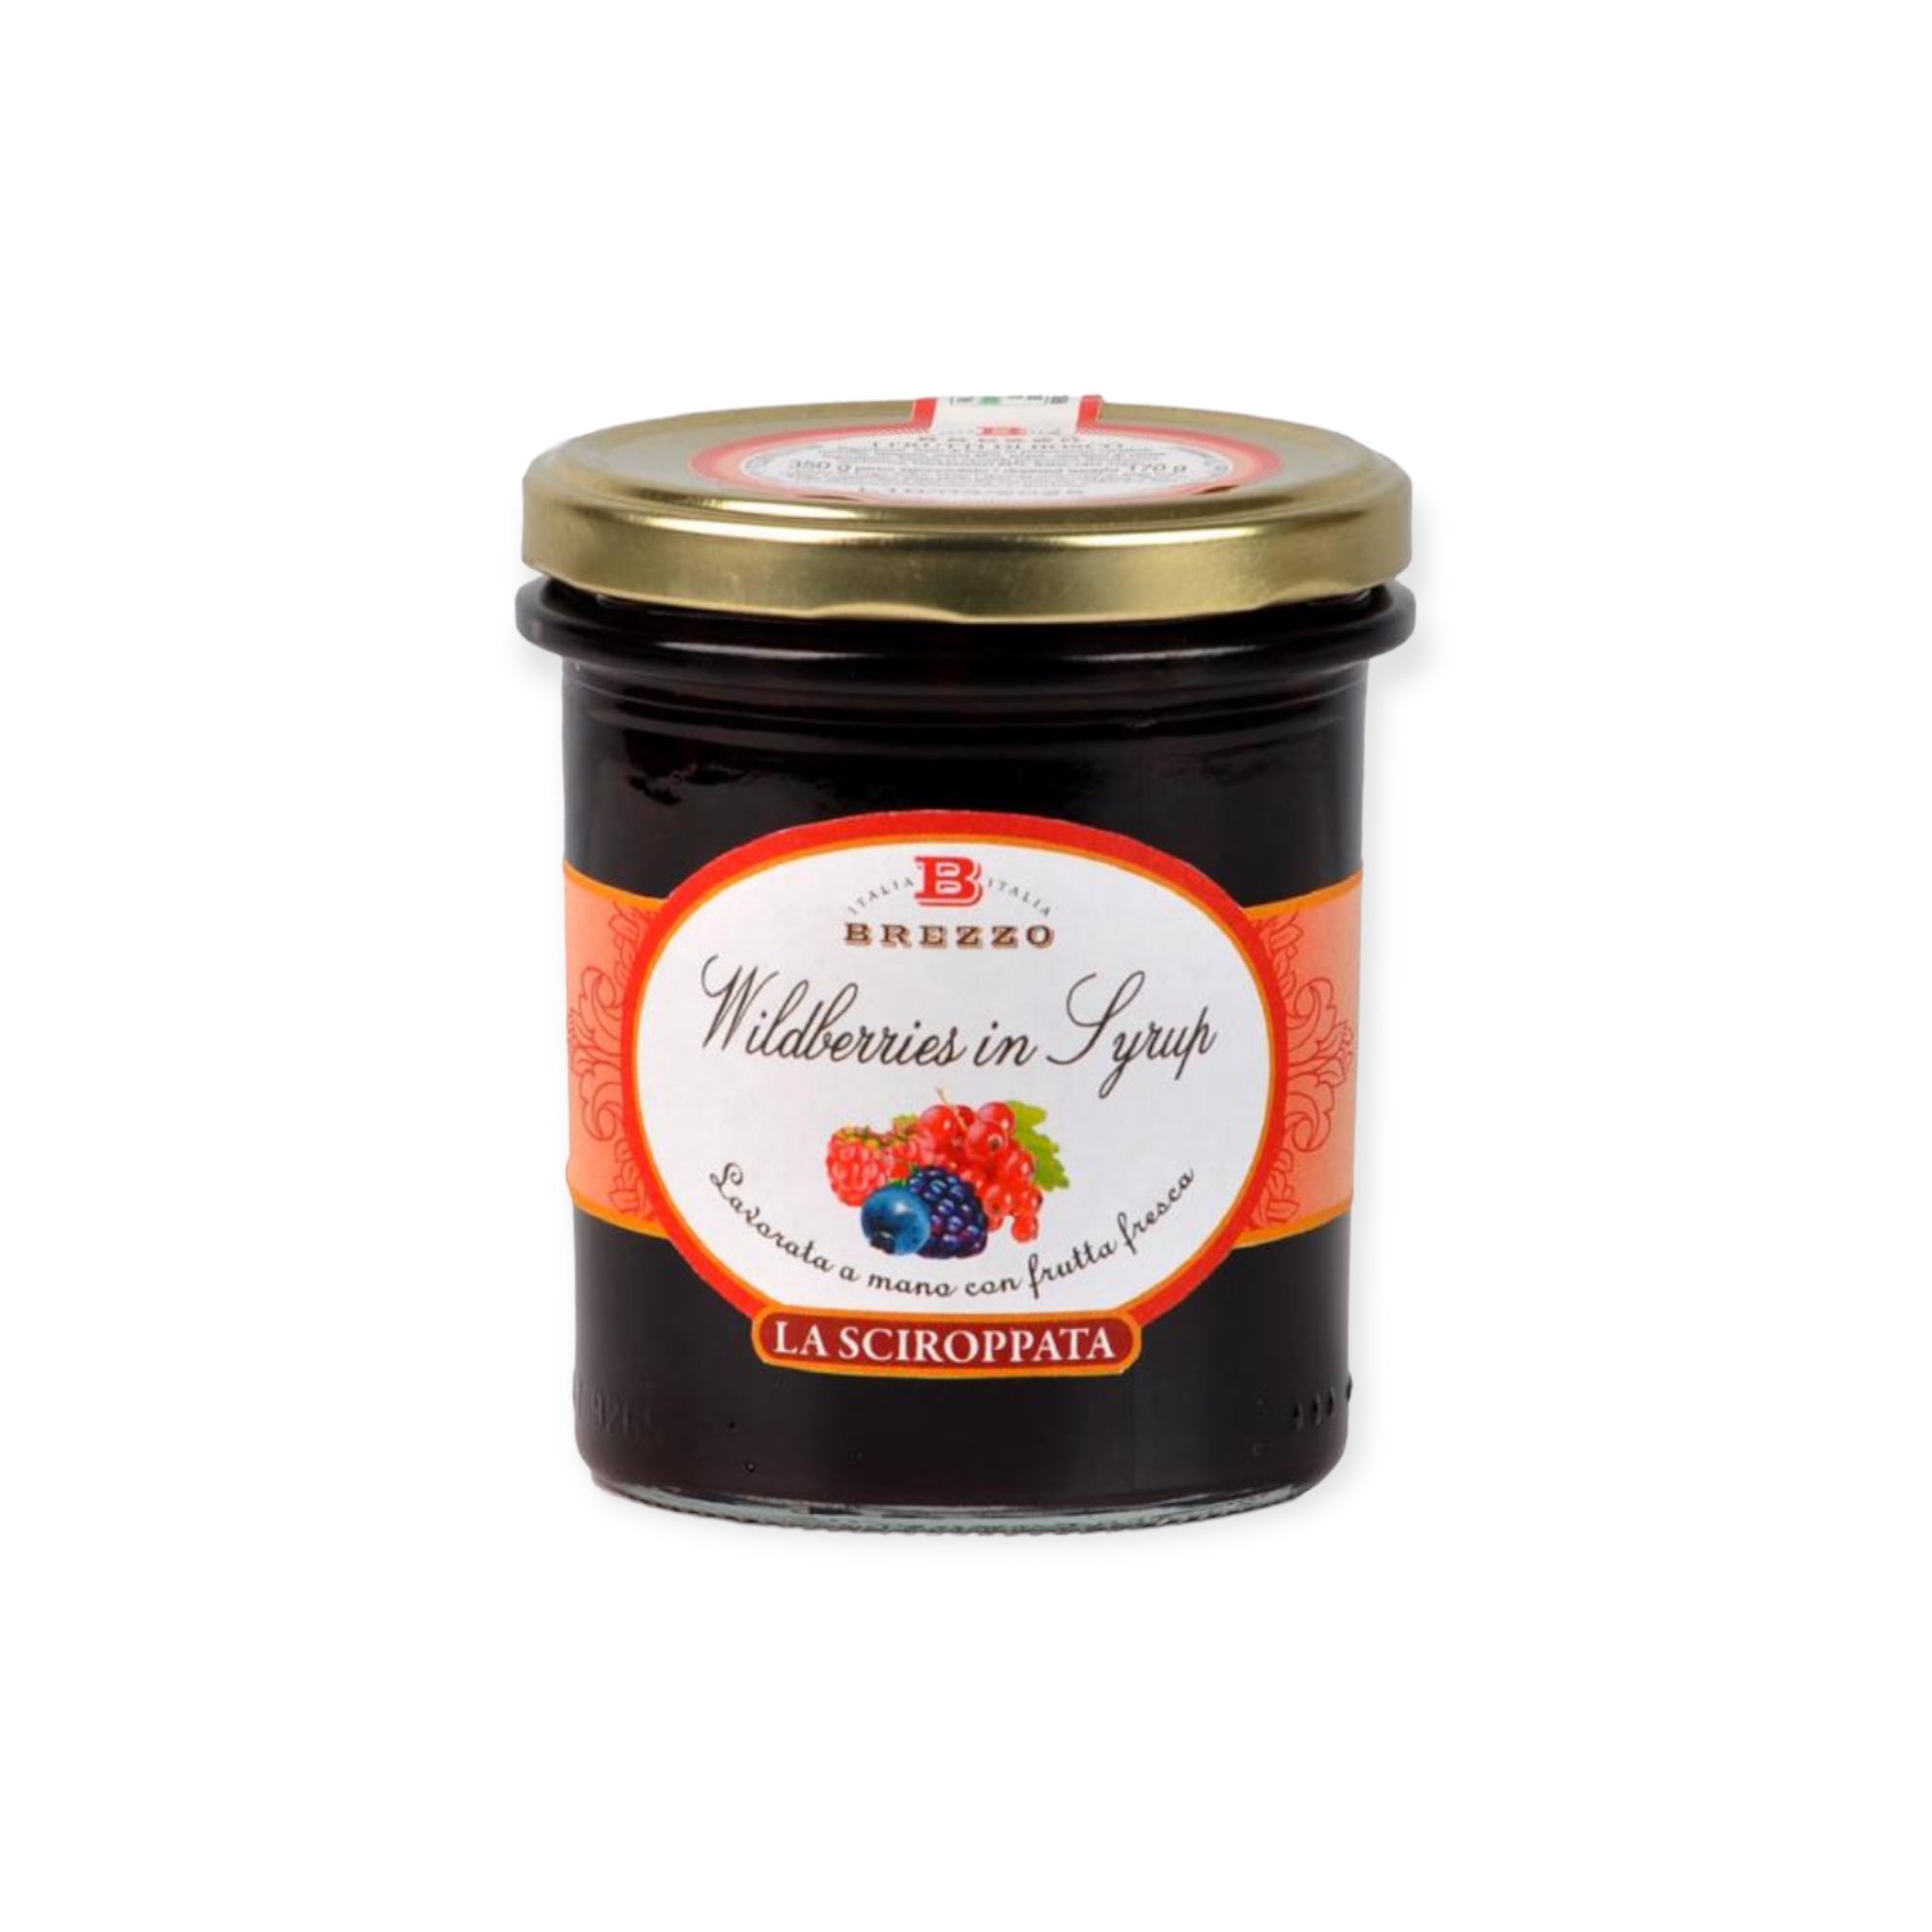 Wildberries In Syrup Glass Jar 350g By Brezzo